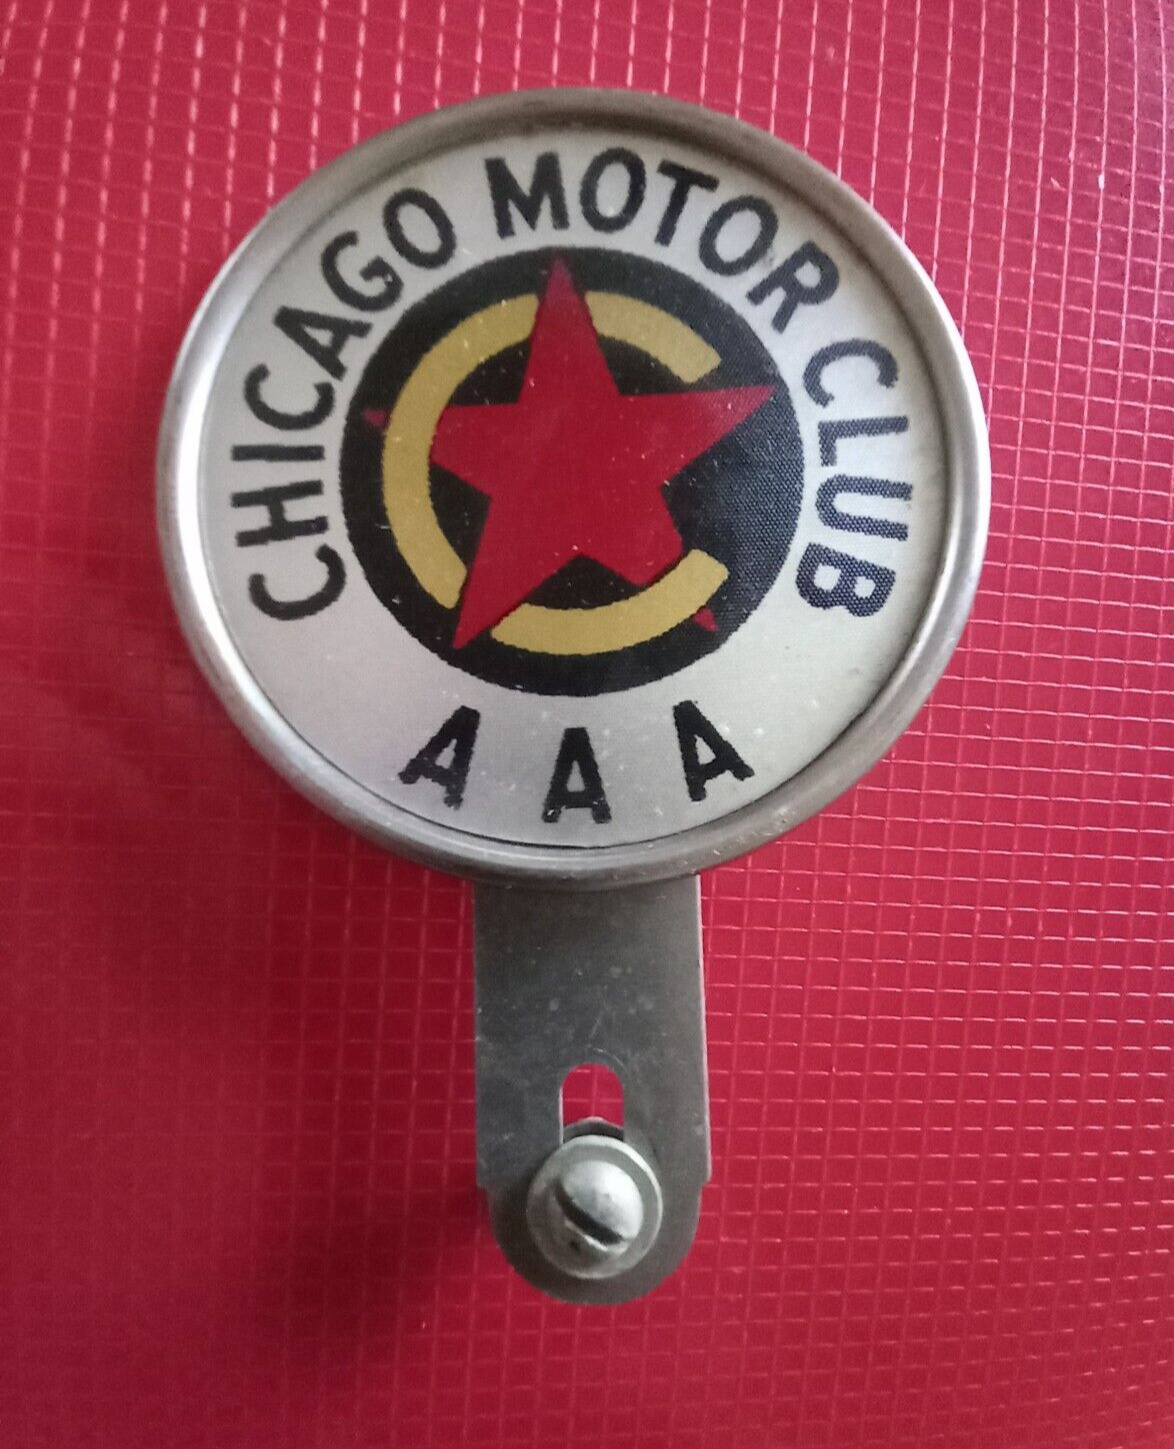 Vintage Chicago Motor Club AAA METAL License Plate Topper / Reflector